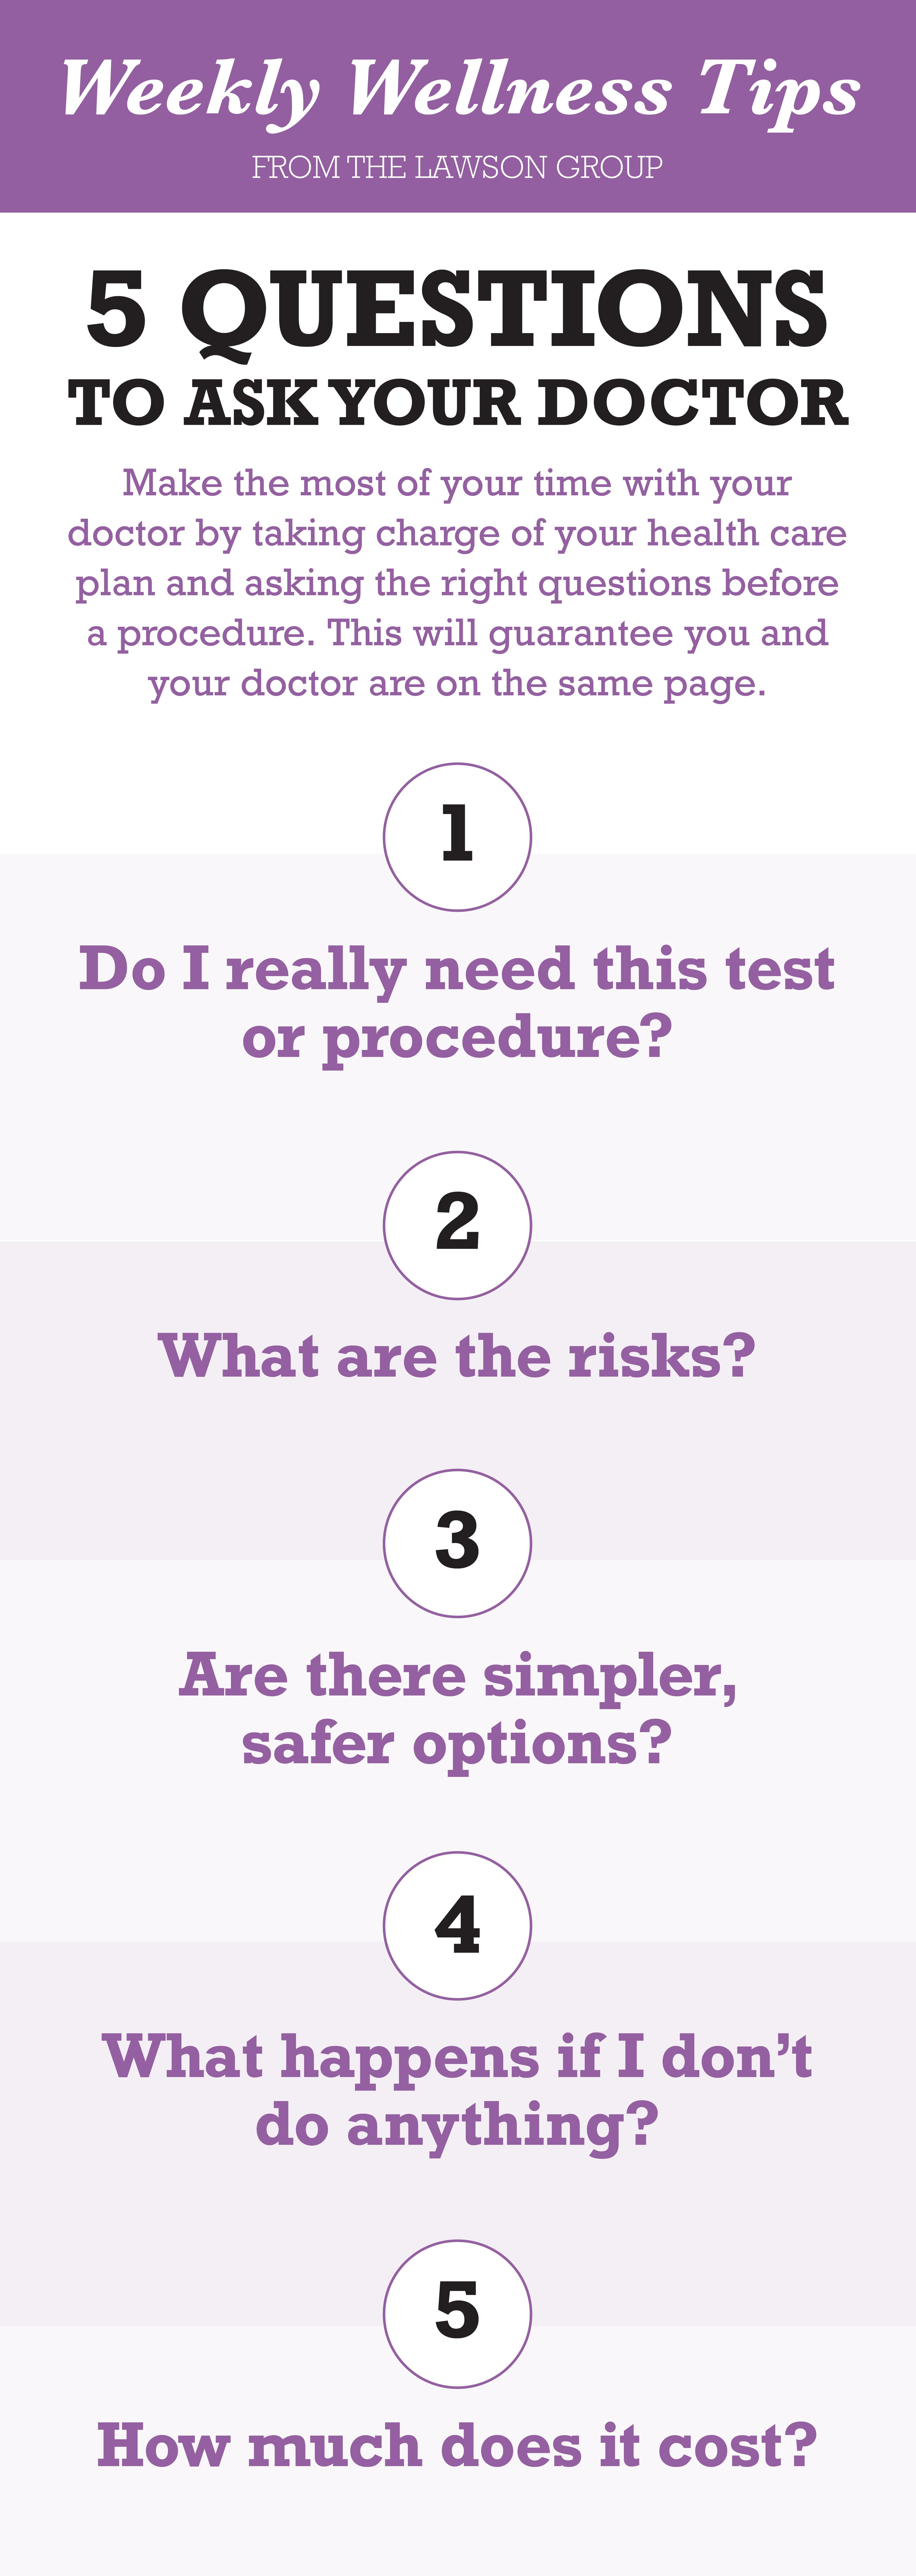 TLG22005 Wellness Tips 5 Questions to Ask Your Doctor Infographic-1080px-01